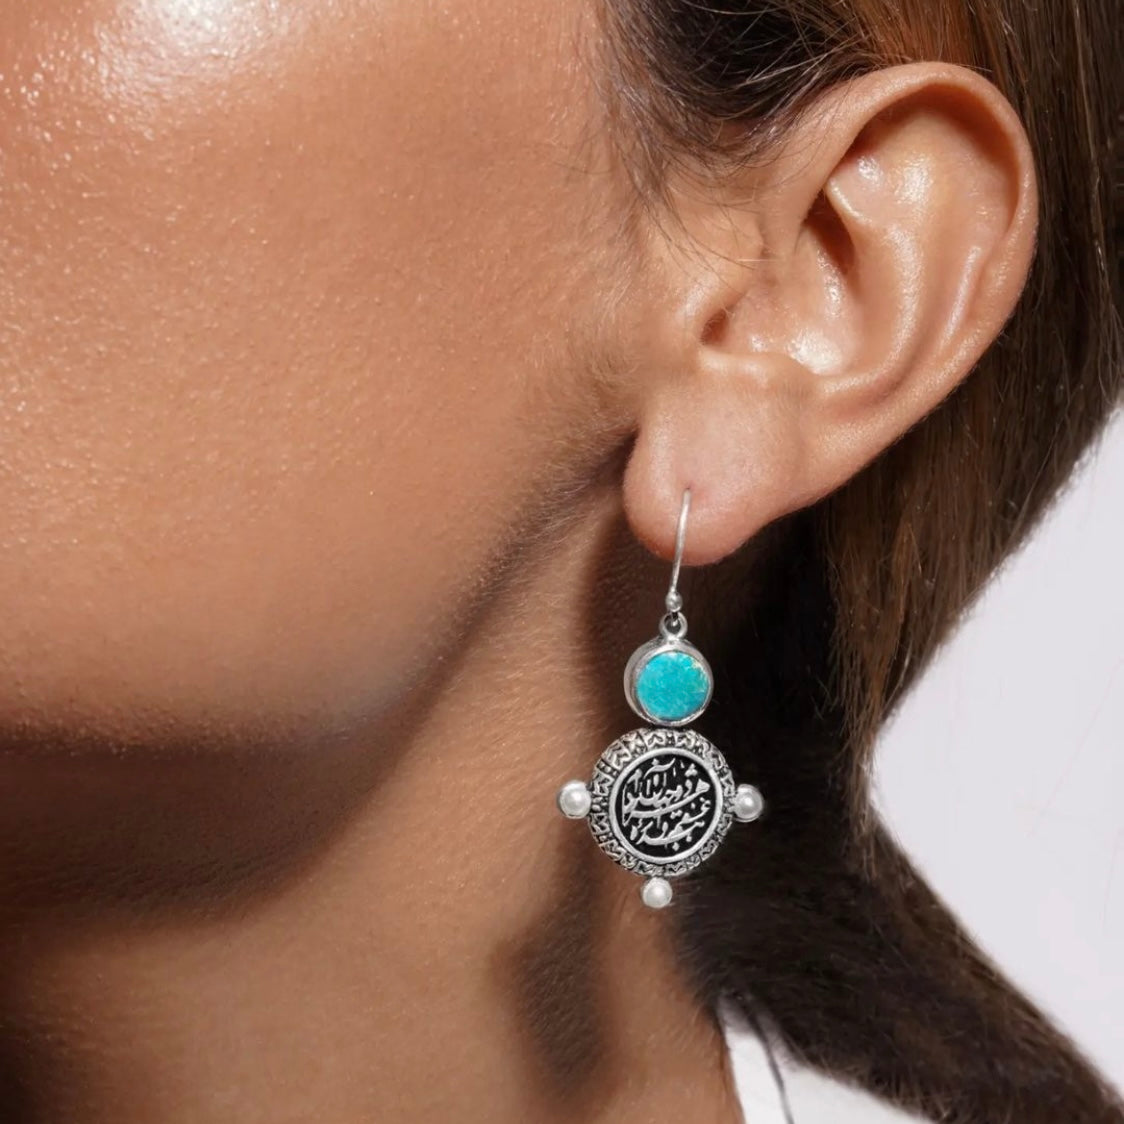 Persian Turquoise Jewelry-Handmade Silver Earrings with Persian Calligraphy and Turquoise: Persian Jewelry-AFRA ART GALLERY